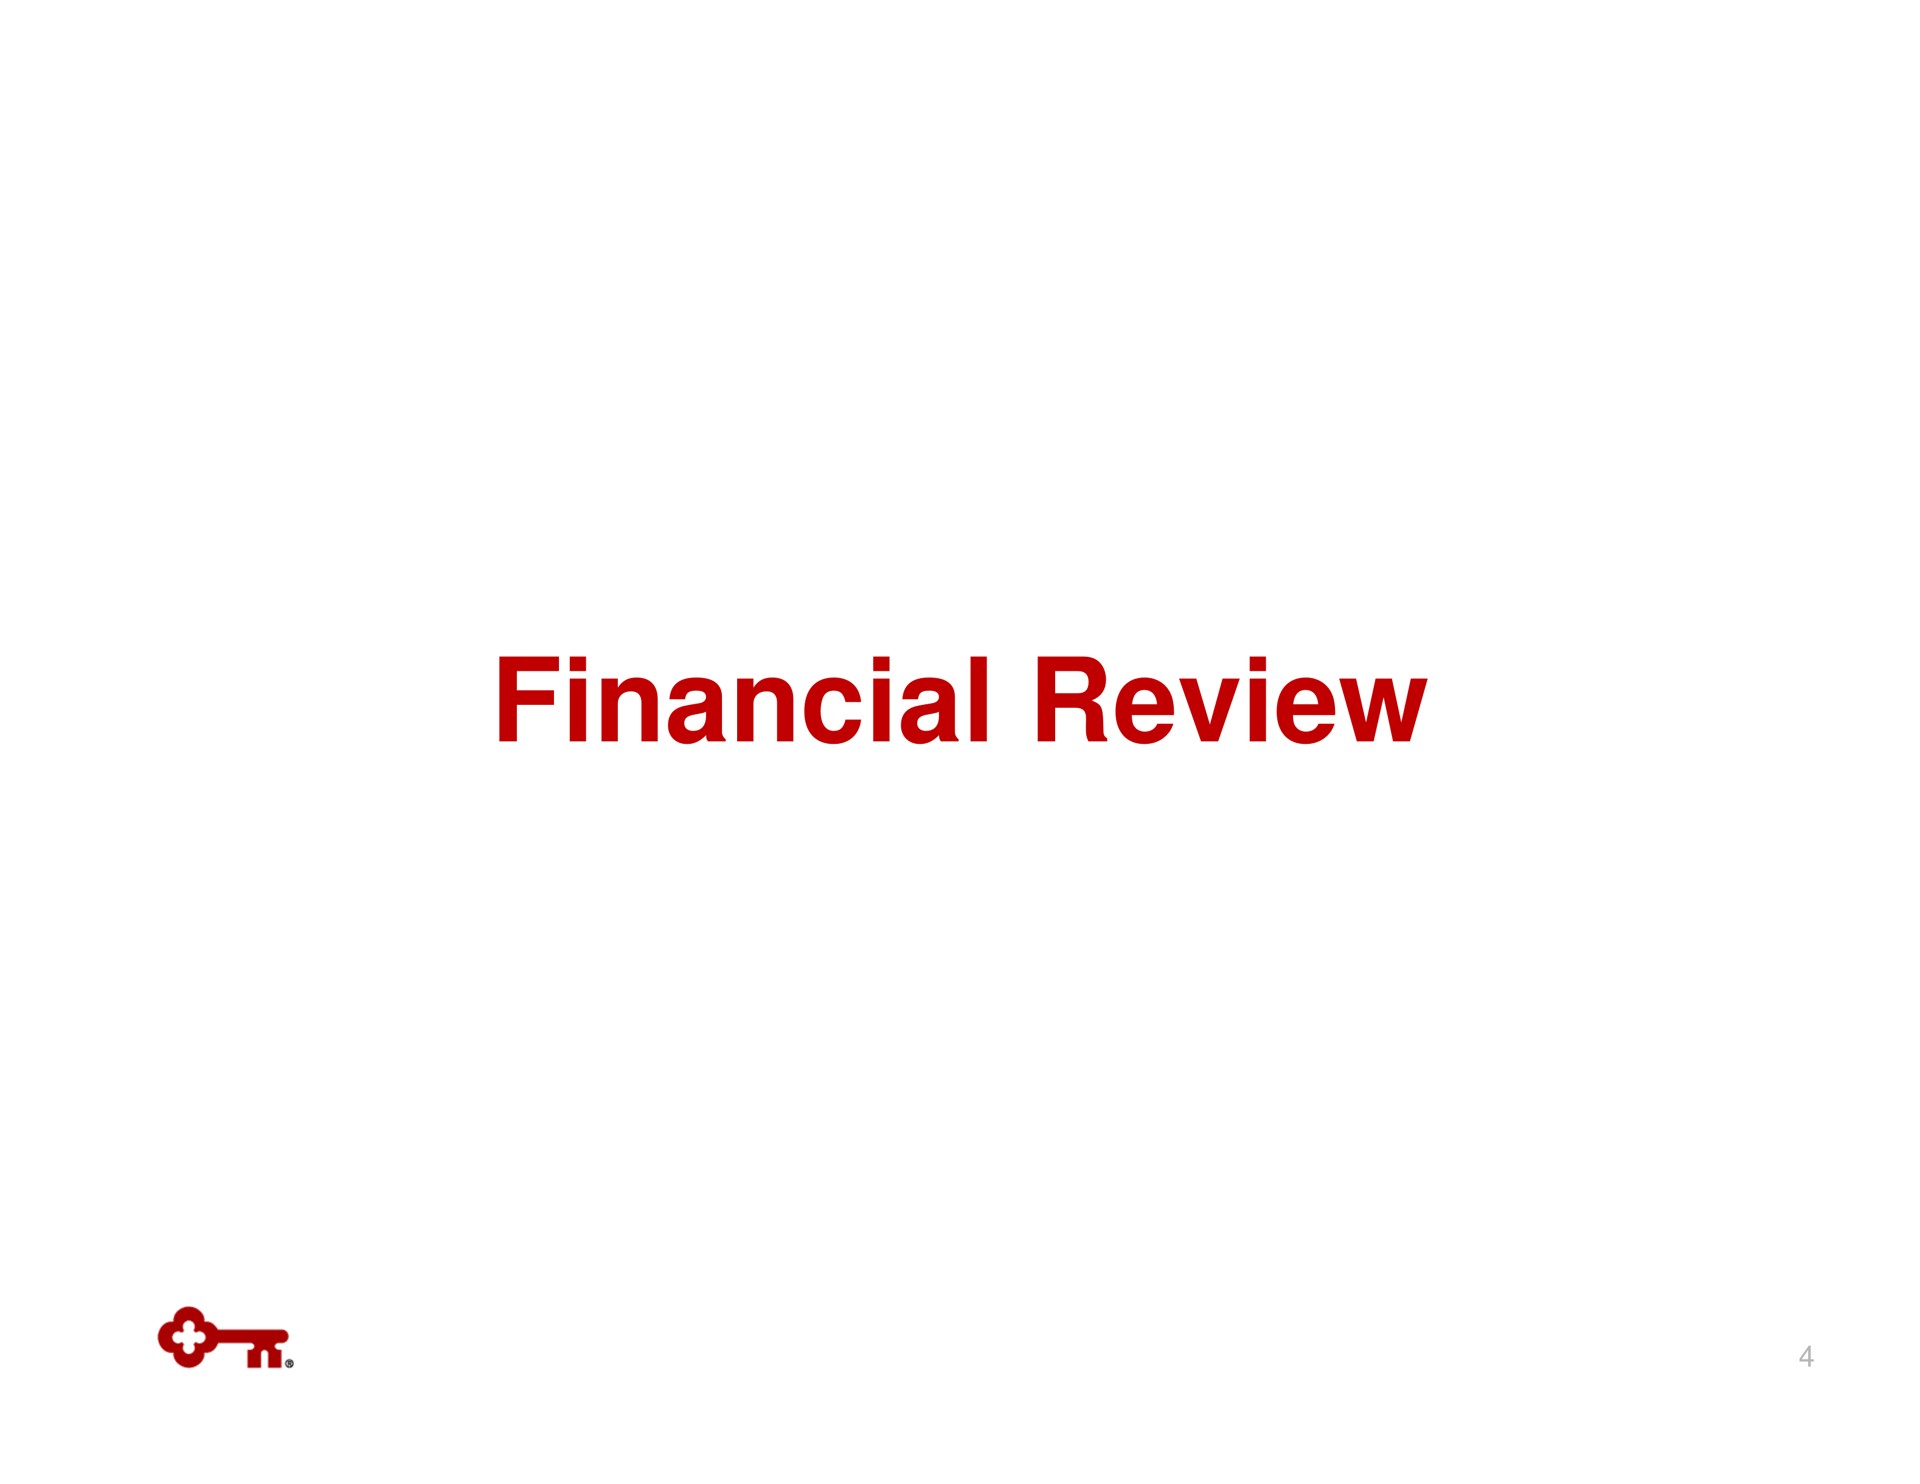 financial review | KeyCorp